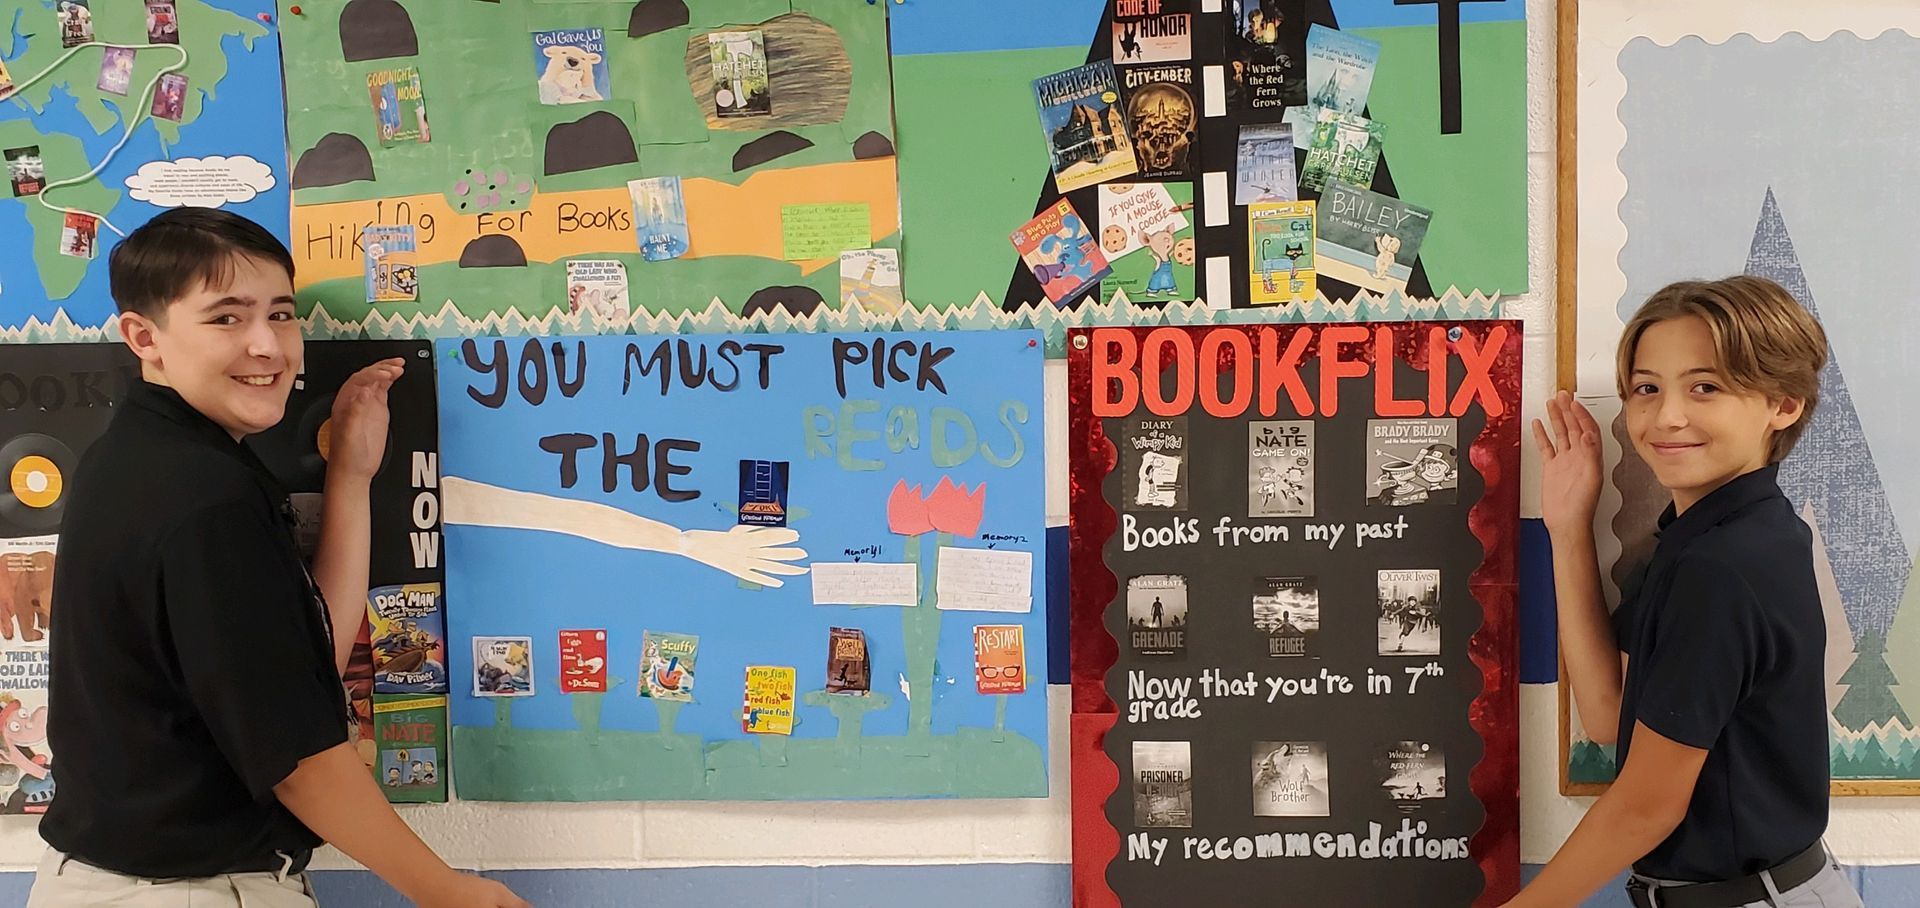 Various posters promoting kids to read.